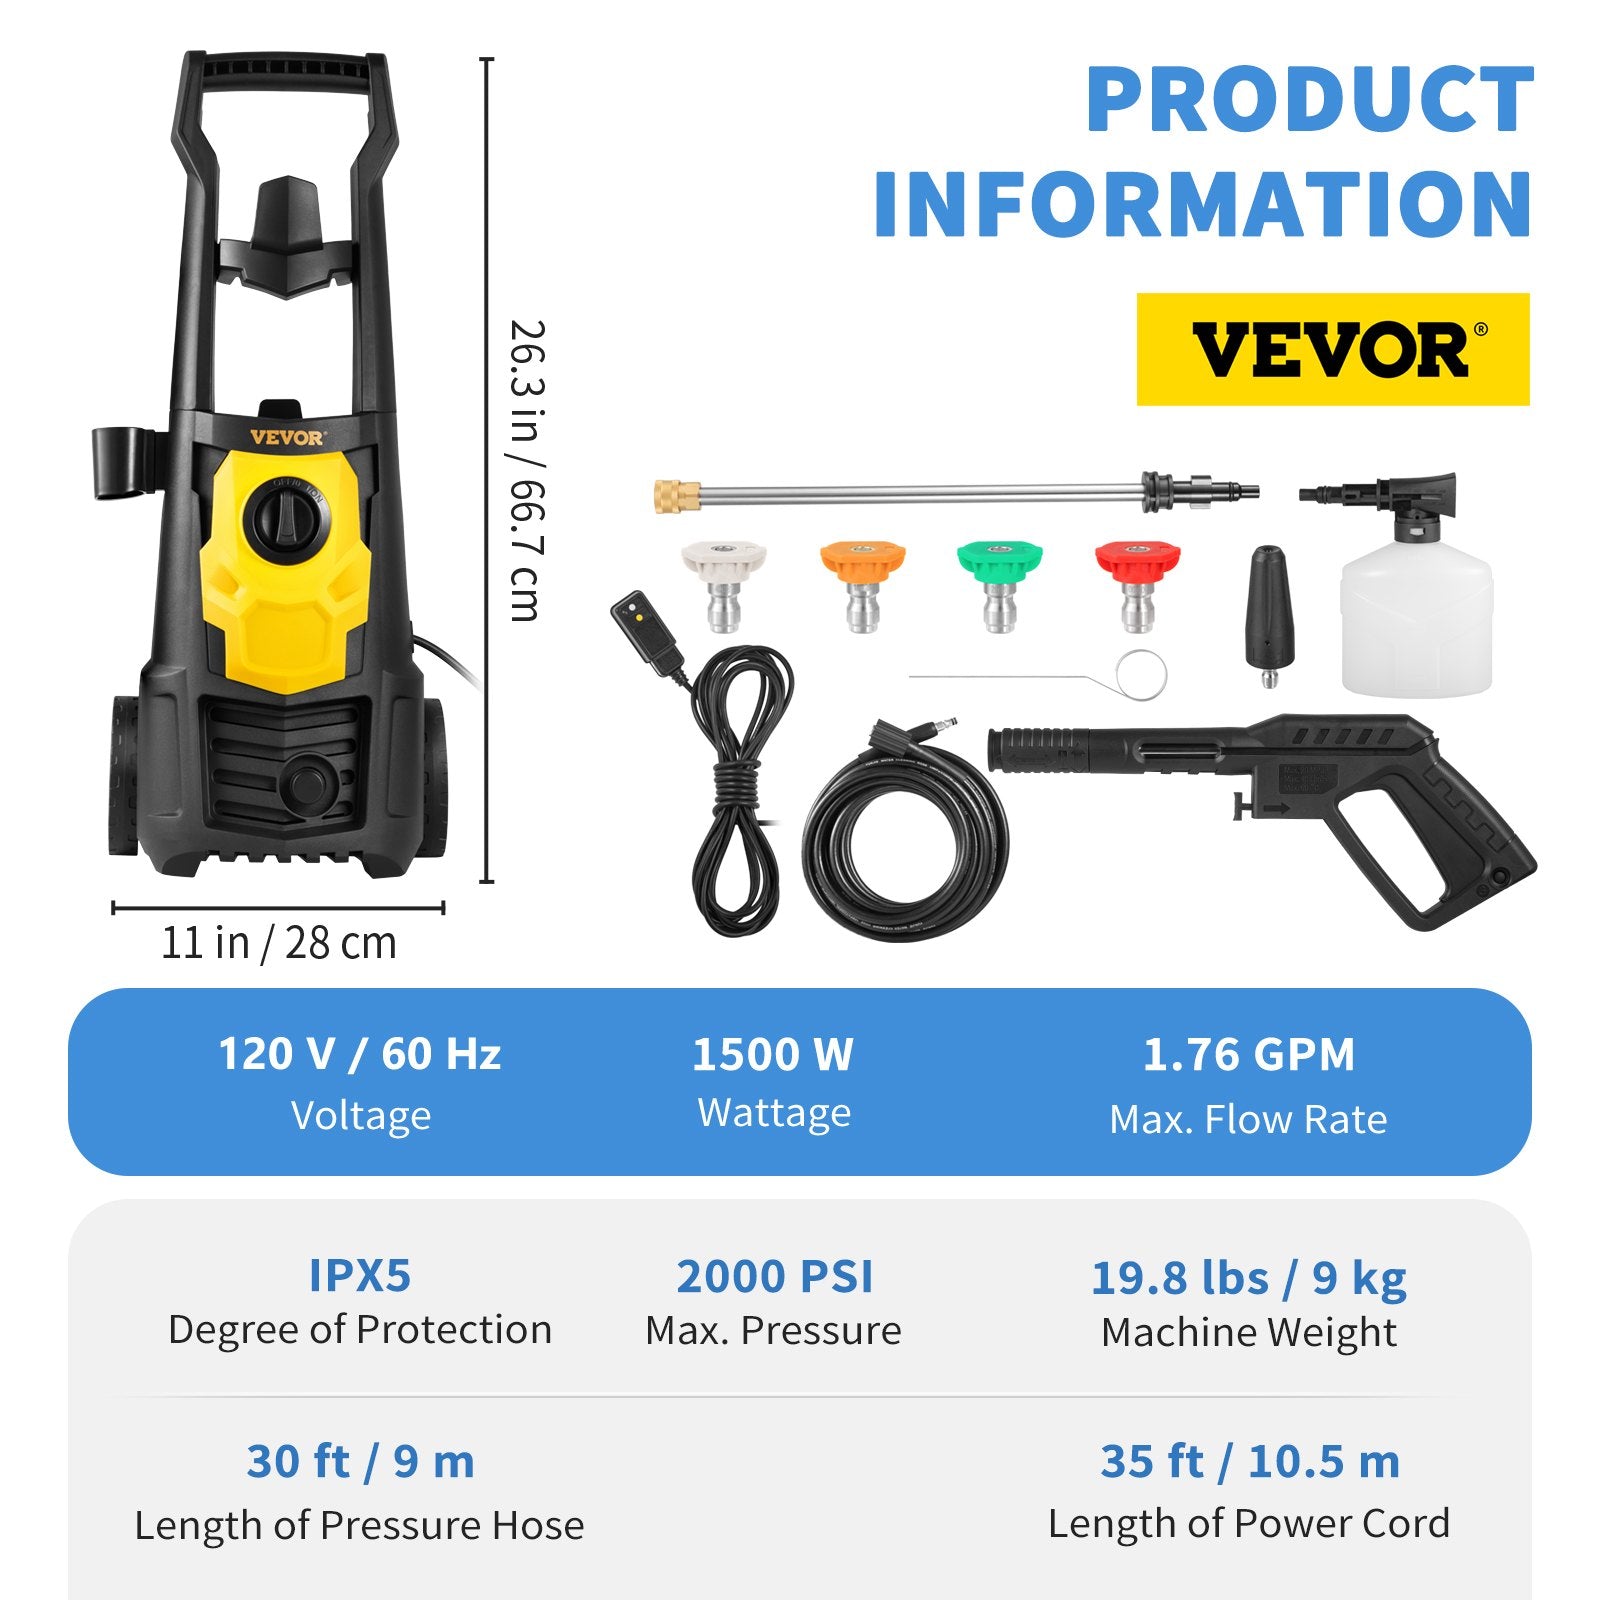 VEVOR Electric Pressure Washer, 2000 PSI, Max. 1.76 GPM Power Washer w/ 30 ft Hose, 5 Quick Connect Nozzles, Foam Cannon, Portable to Clean Patios, Cars, Fences, Driveways, ETL Listed-5